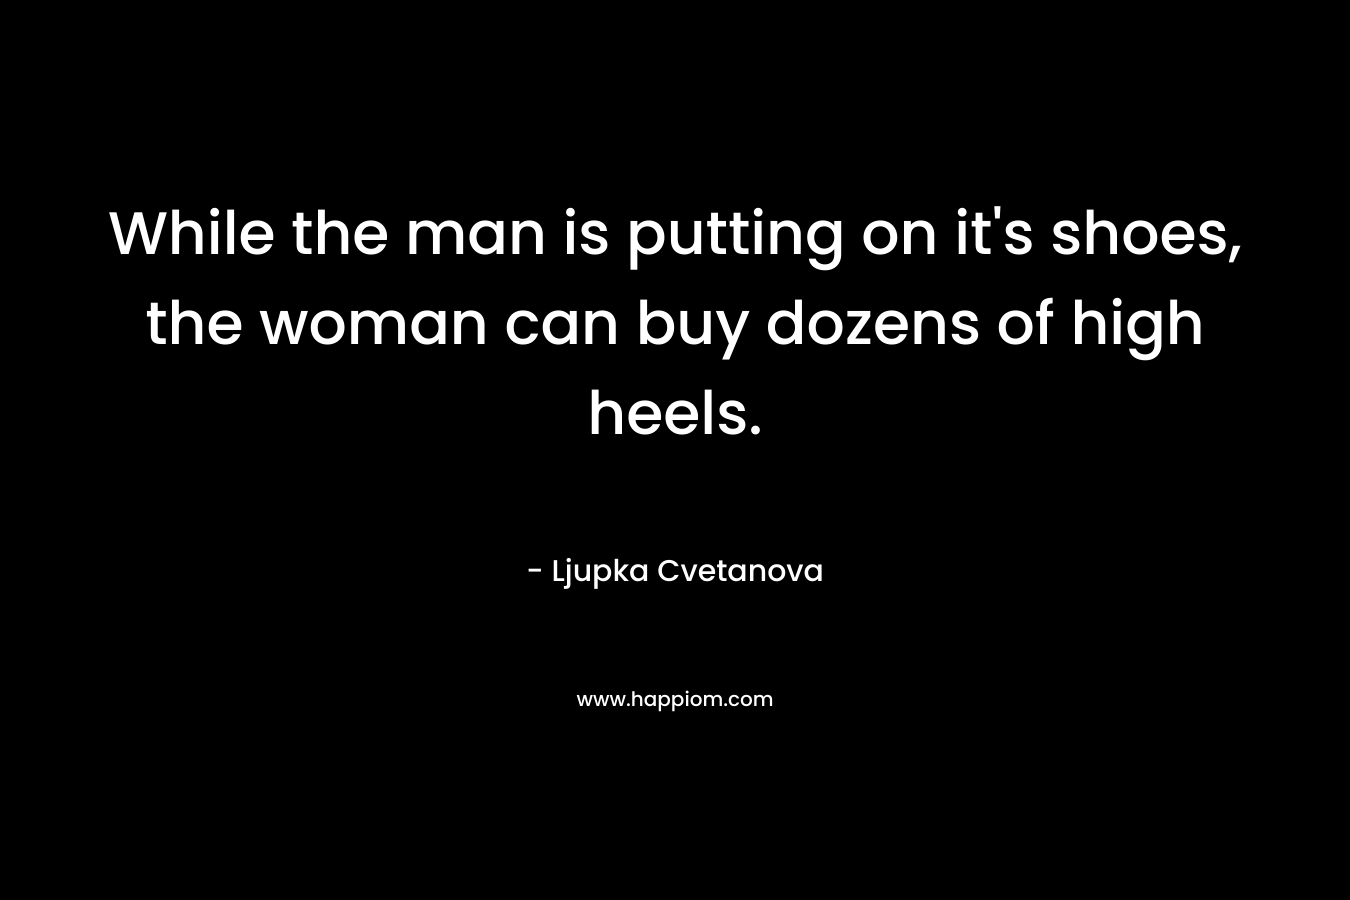 While the man is putting on it's shoes, the woman can buy dozens of high heels.